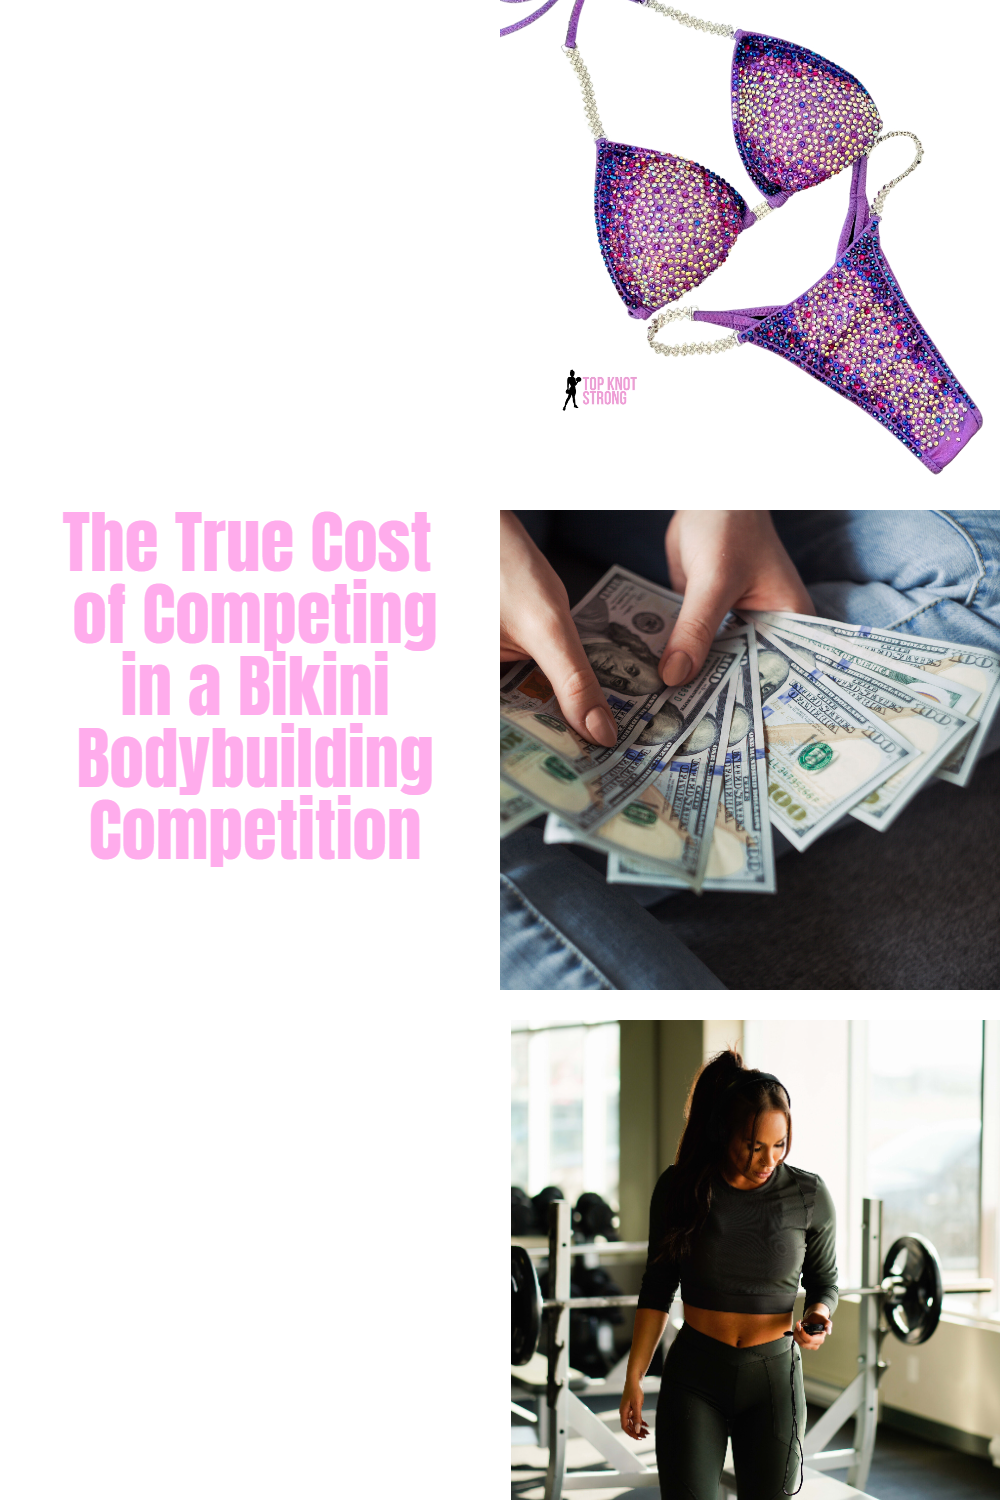 The true cost of competing in a bikini bodybuilding competition